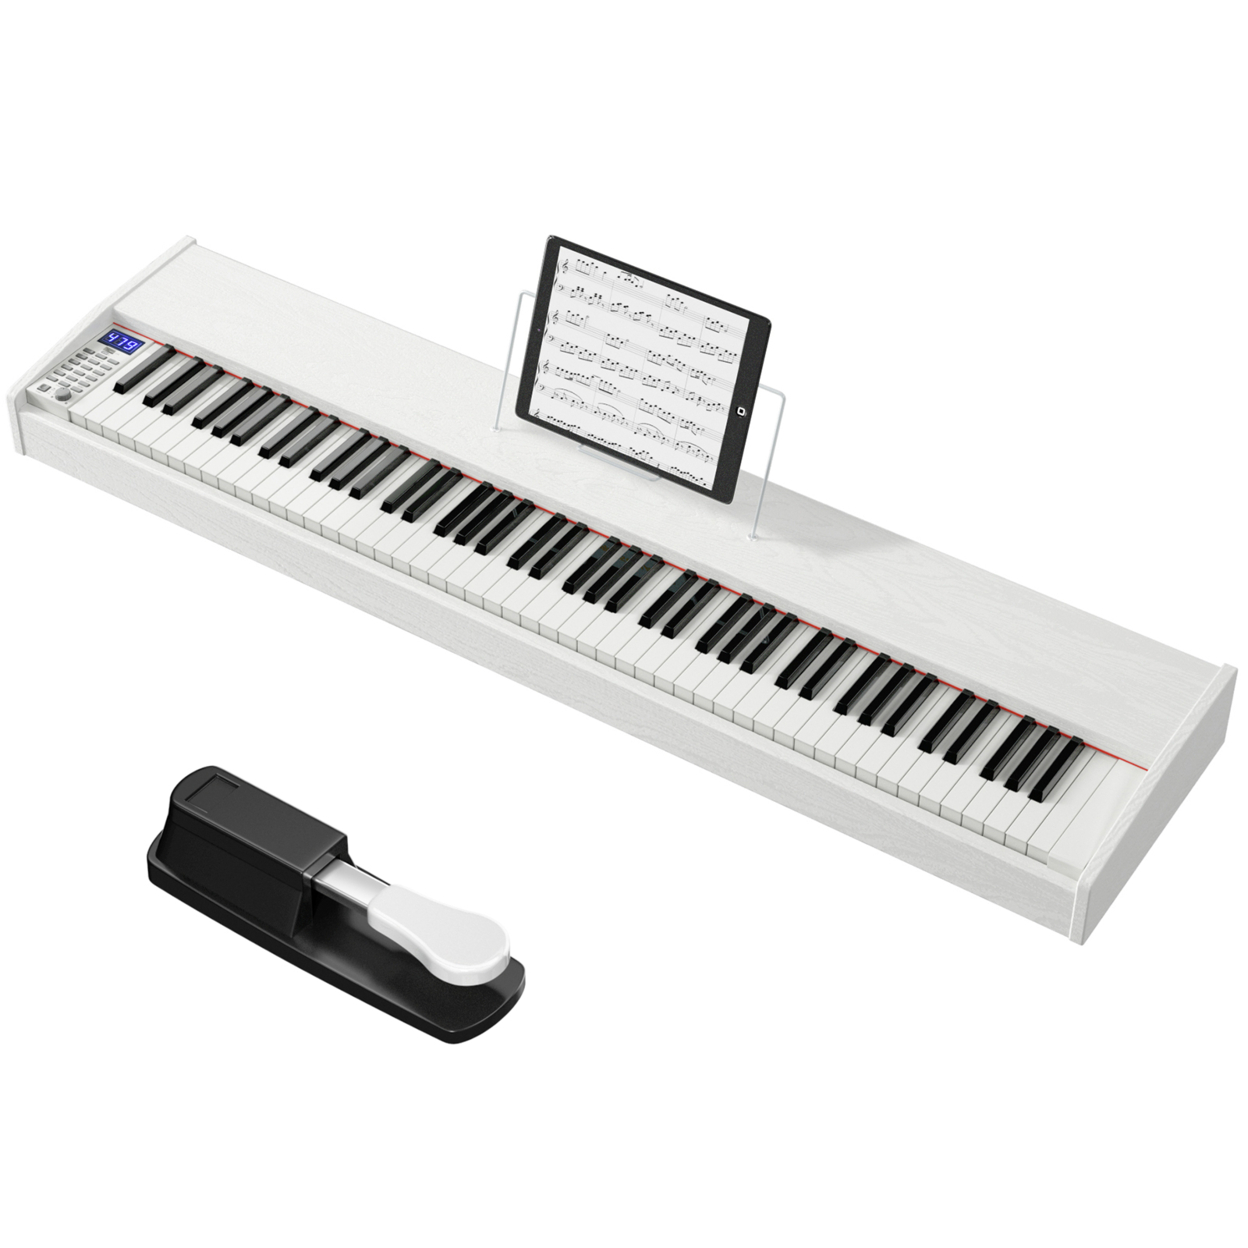 88-Key Full Size Digital Piano Weighted Keyboard W/ Sustain Pedal Black/White - White